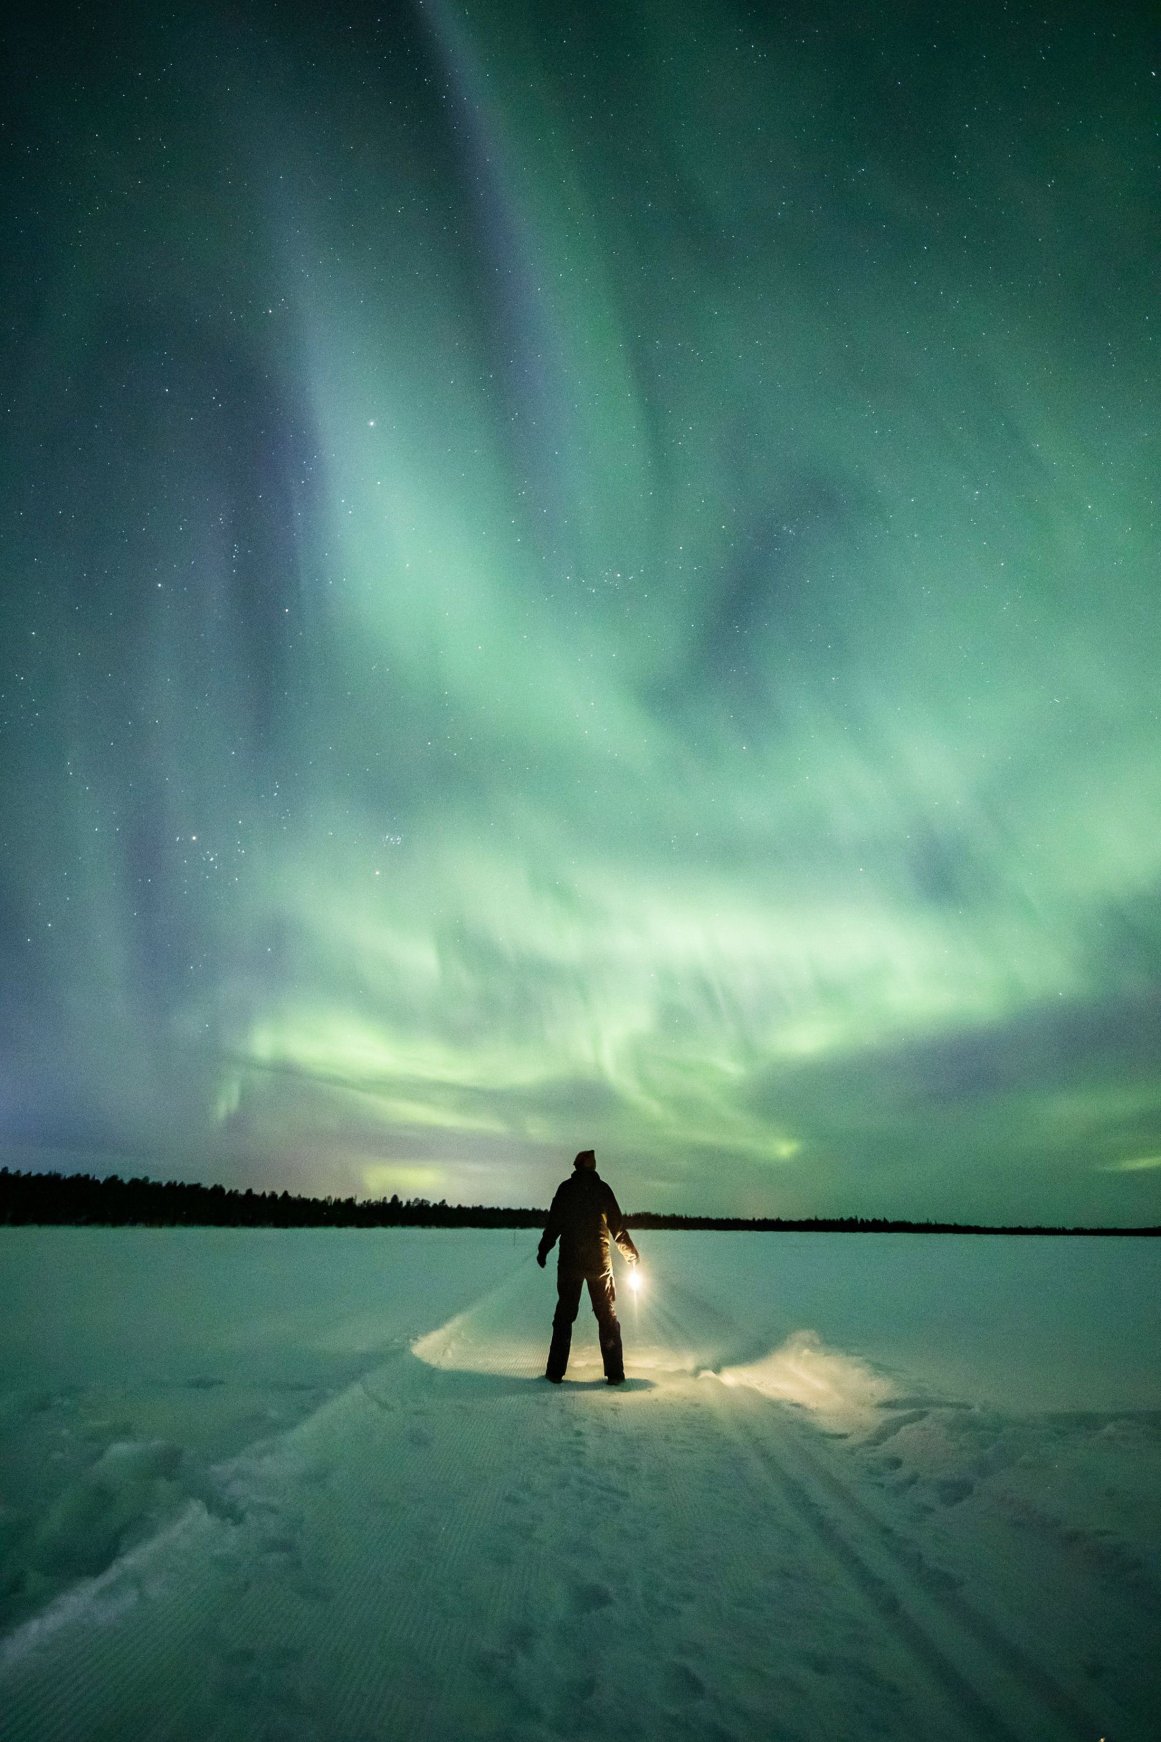 Northern lights magic: The magnificence of the Aurora Borealis | Daily ...